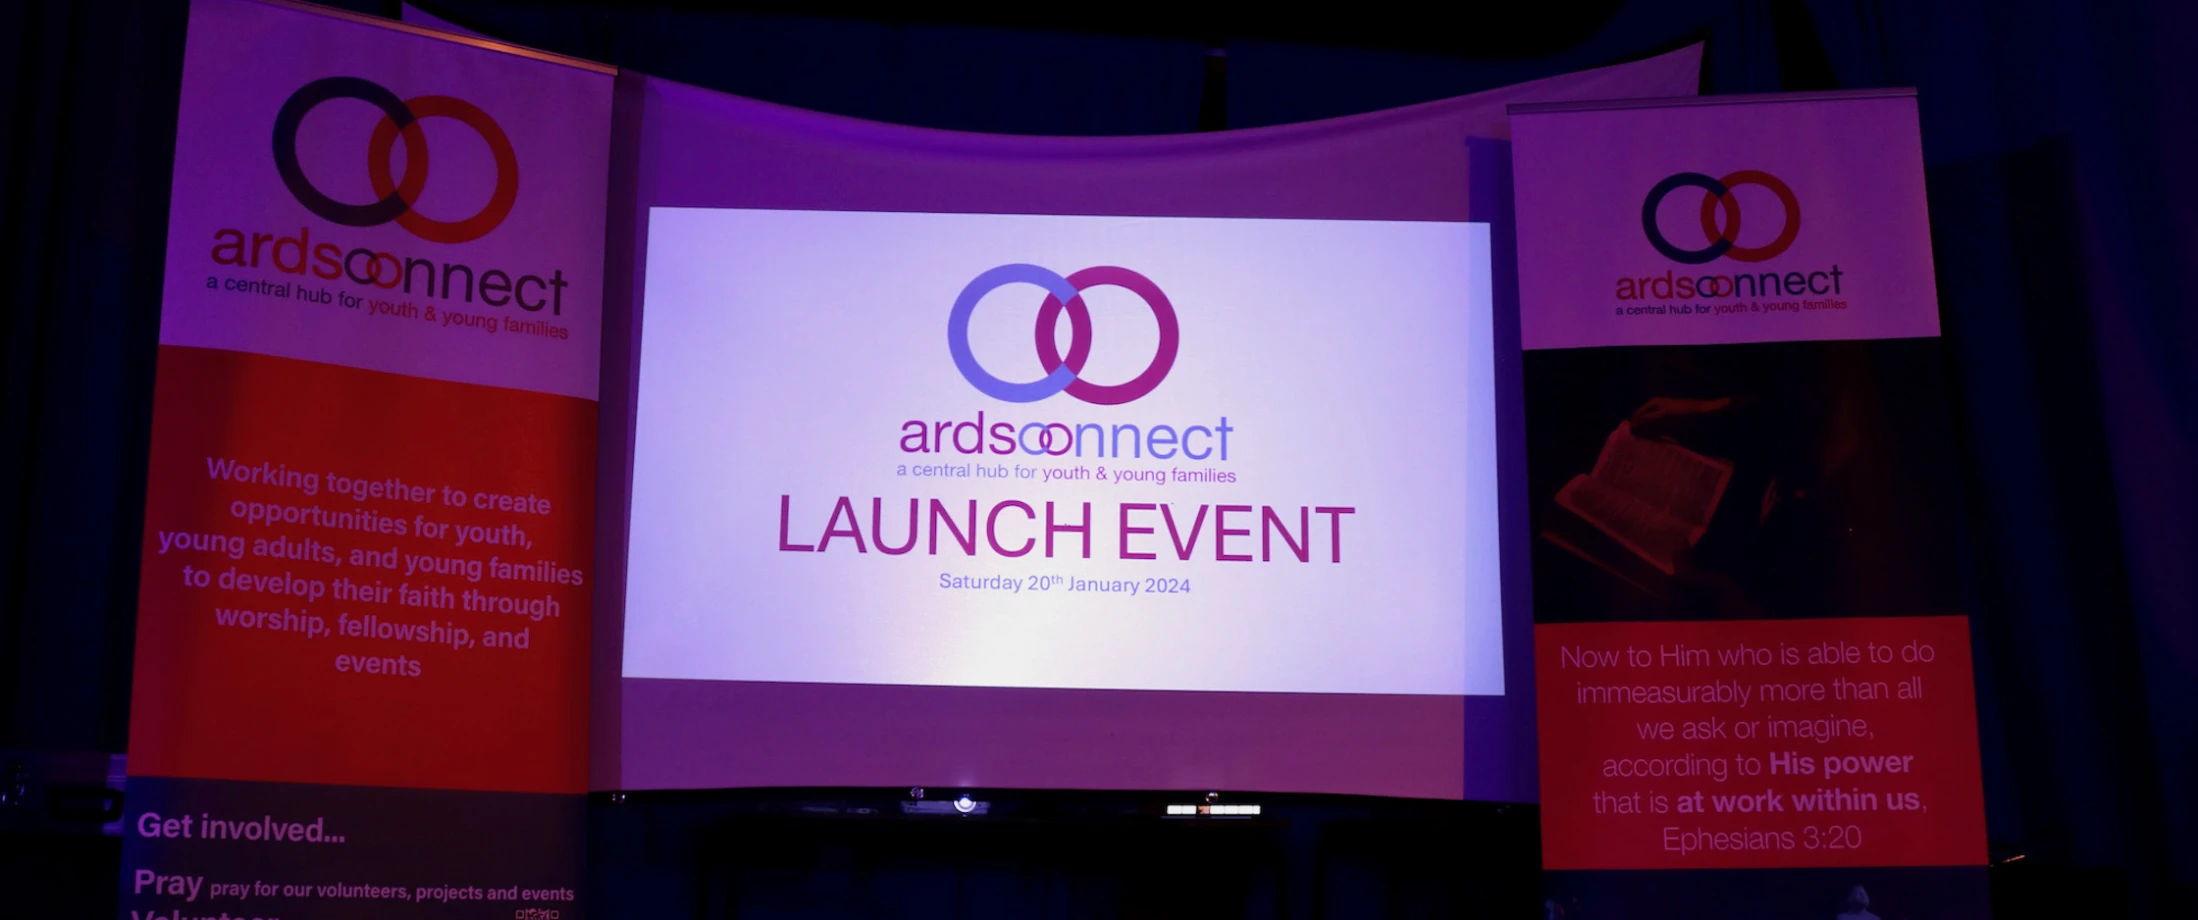 Ards Connect launches with special event